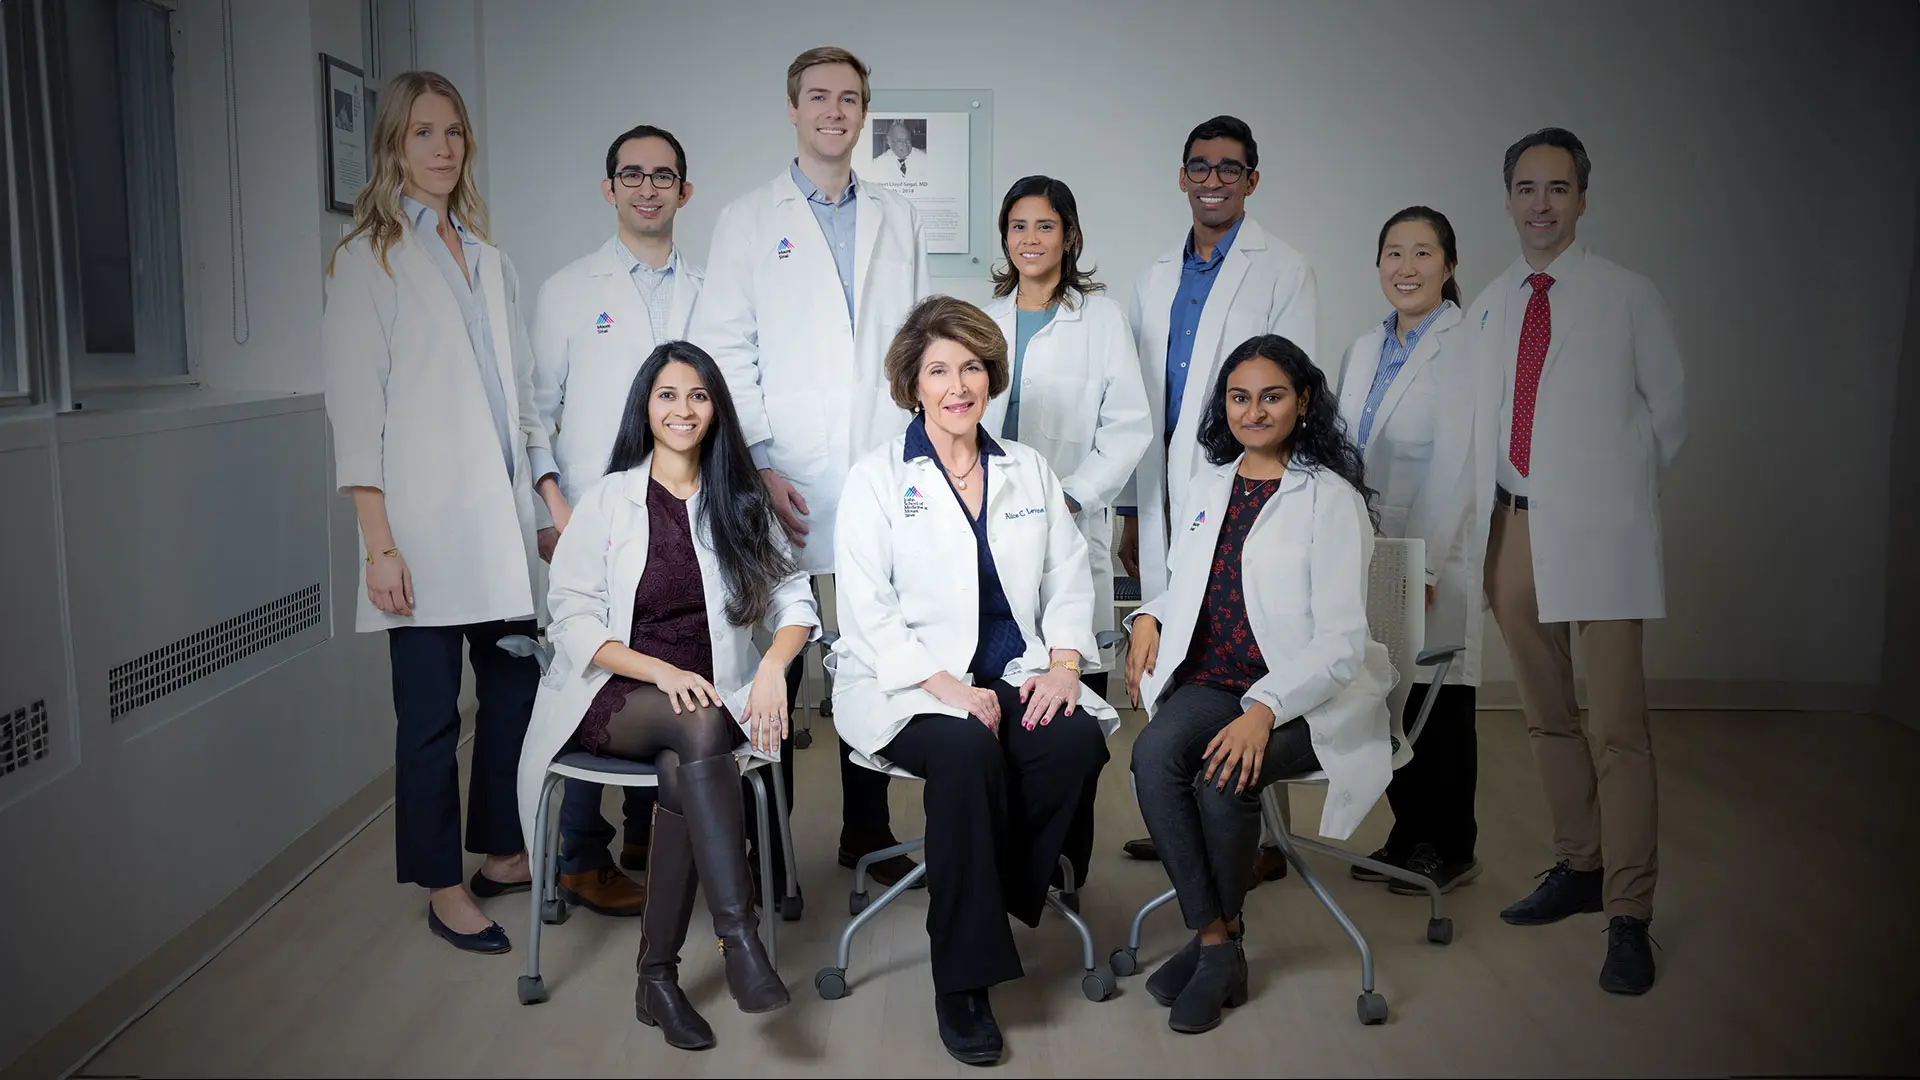 Endocrinology Fellowship, the Largest in U.S., Excels in Clinical and Research Training